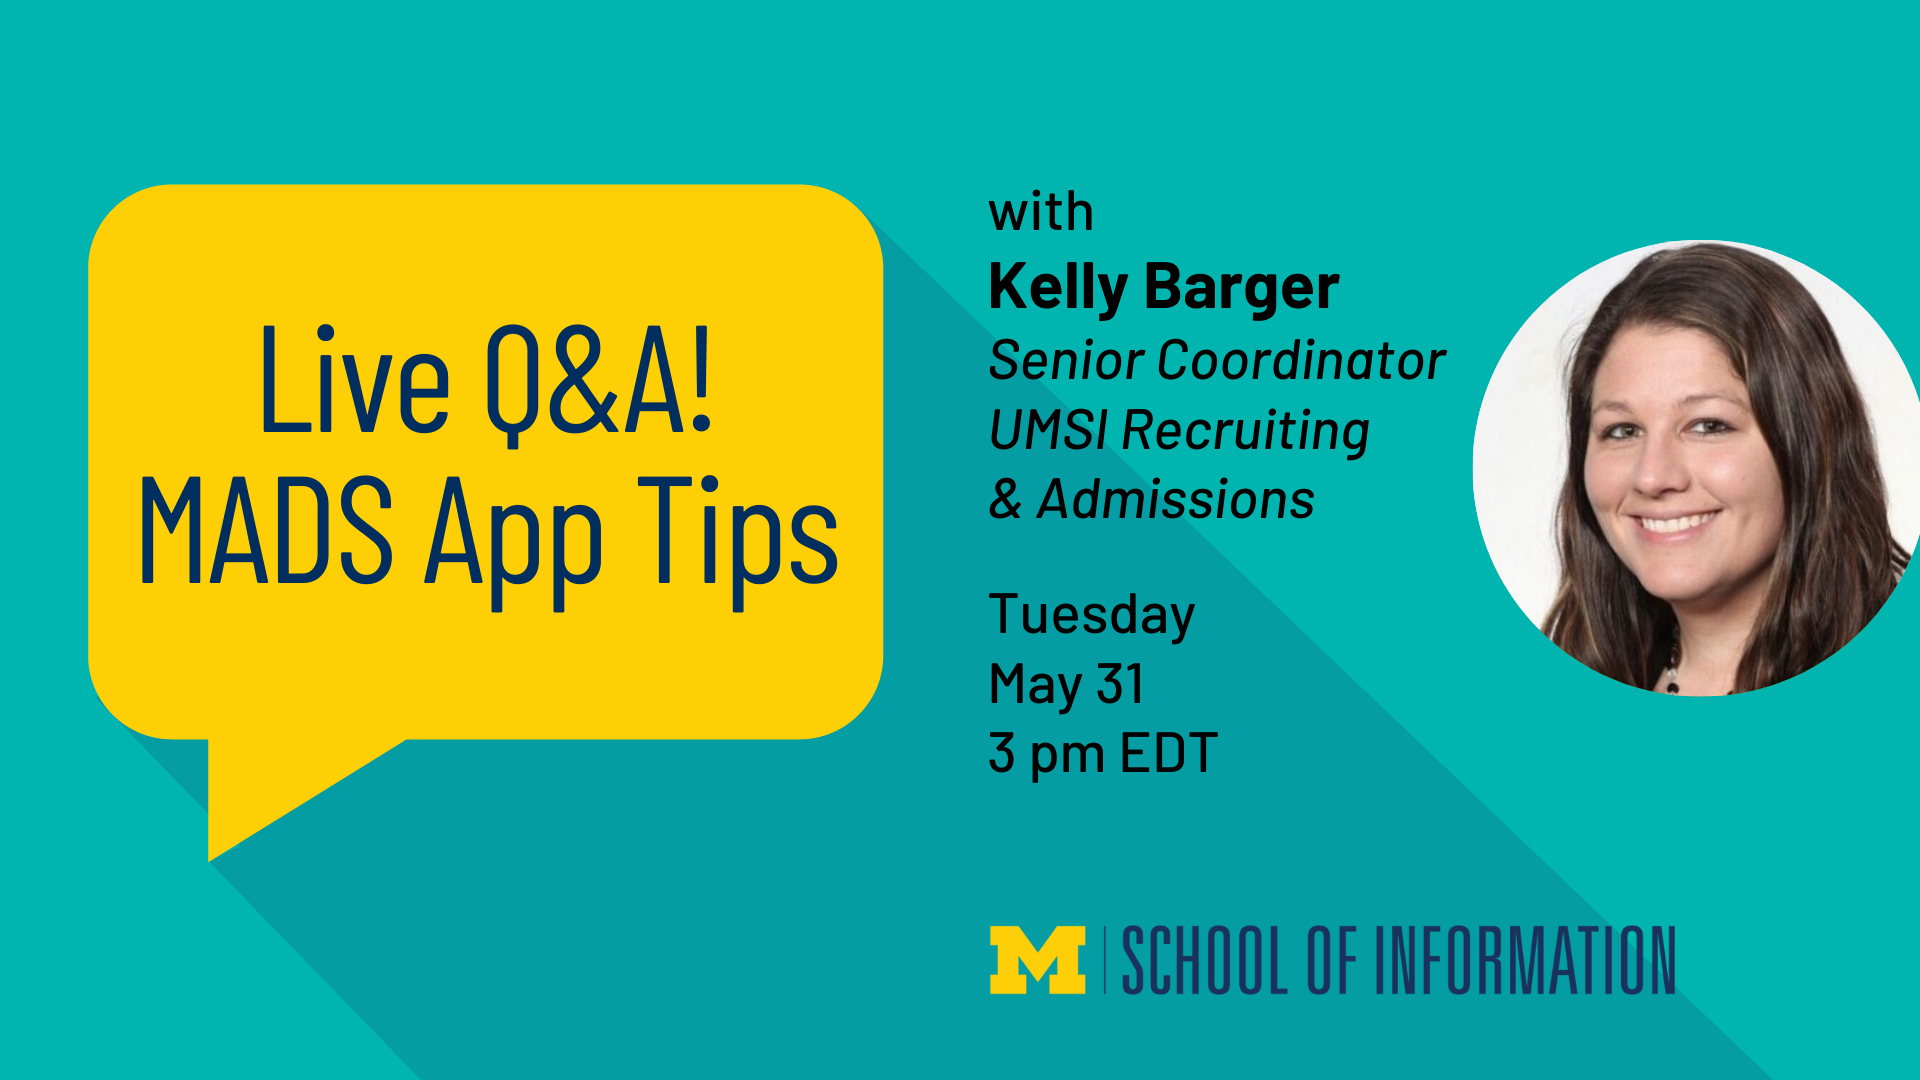 “Live Q&A! MADS App Tips with Kelly Barger. Senior Coordinator, UMSI Recruiting & Admissions. Tuesday, May 31. 3 pm EDT.” 